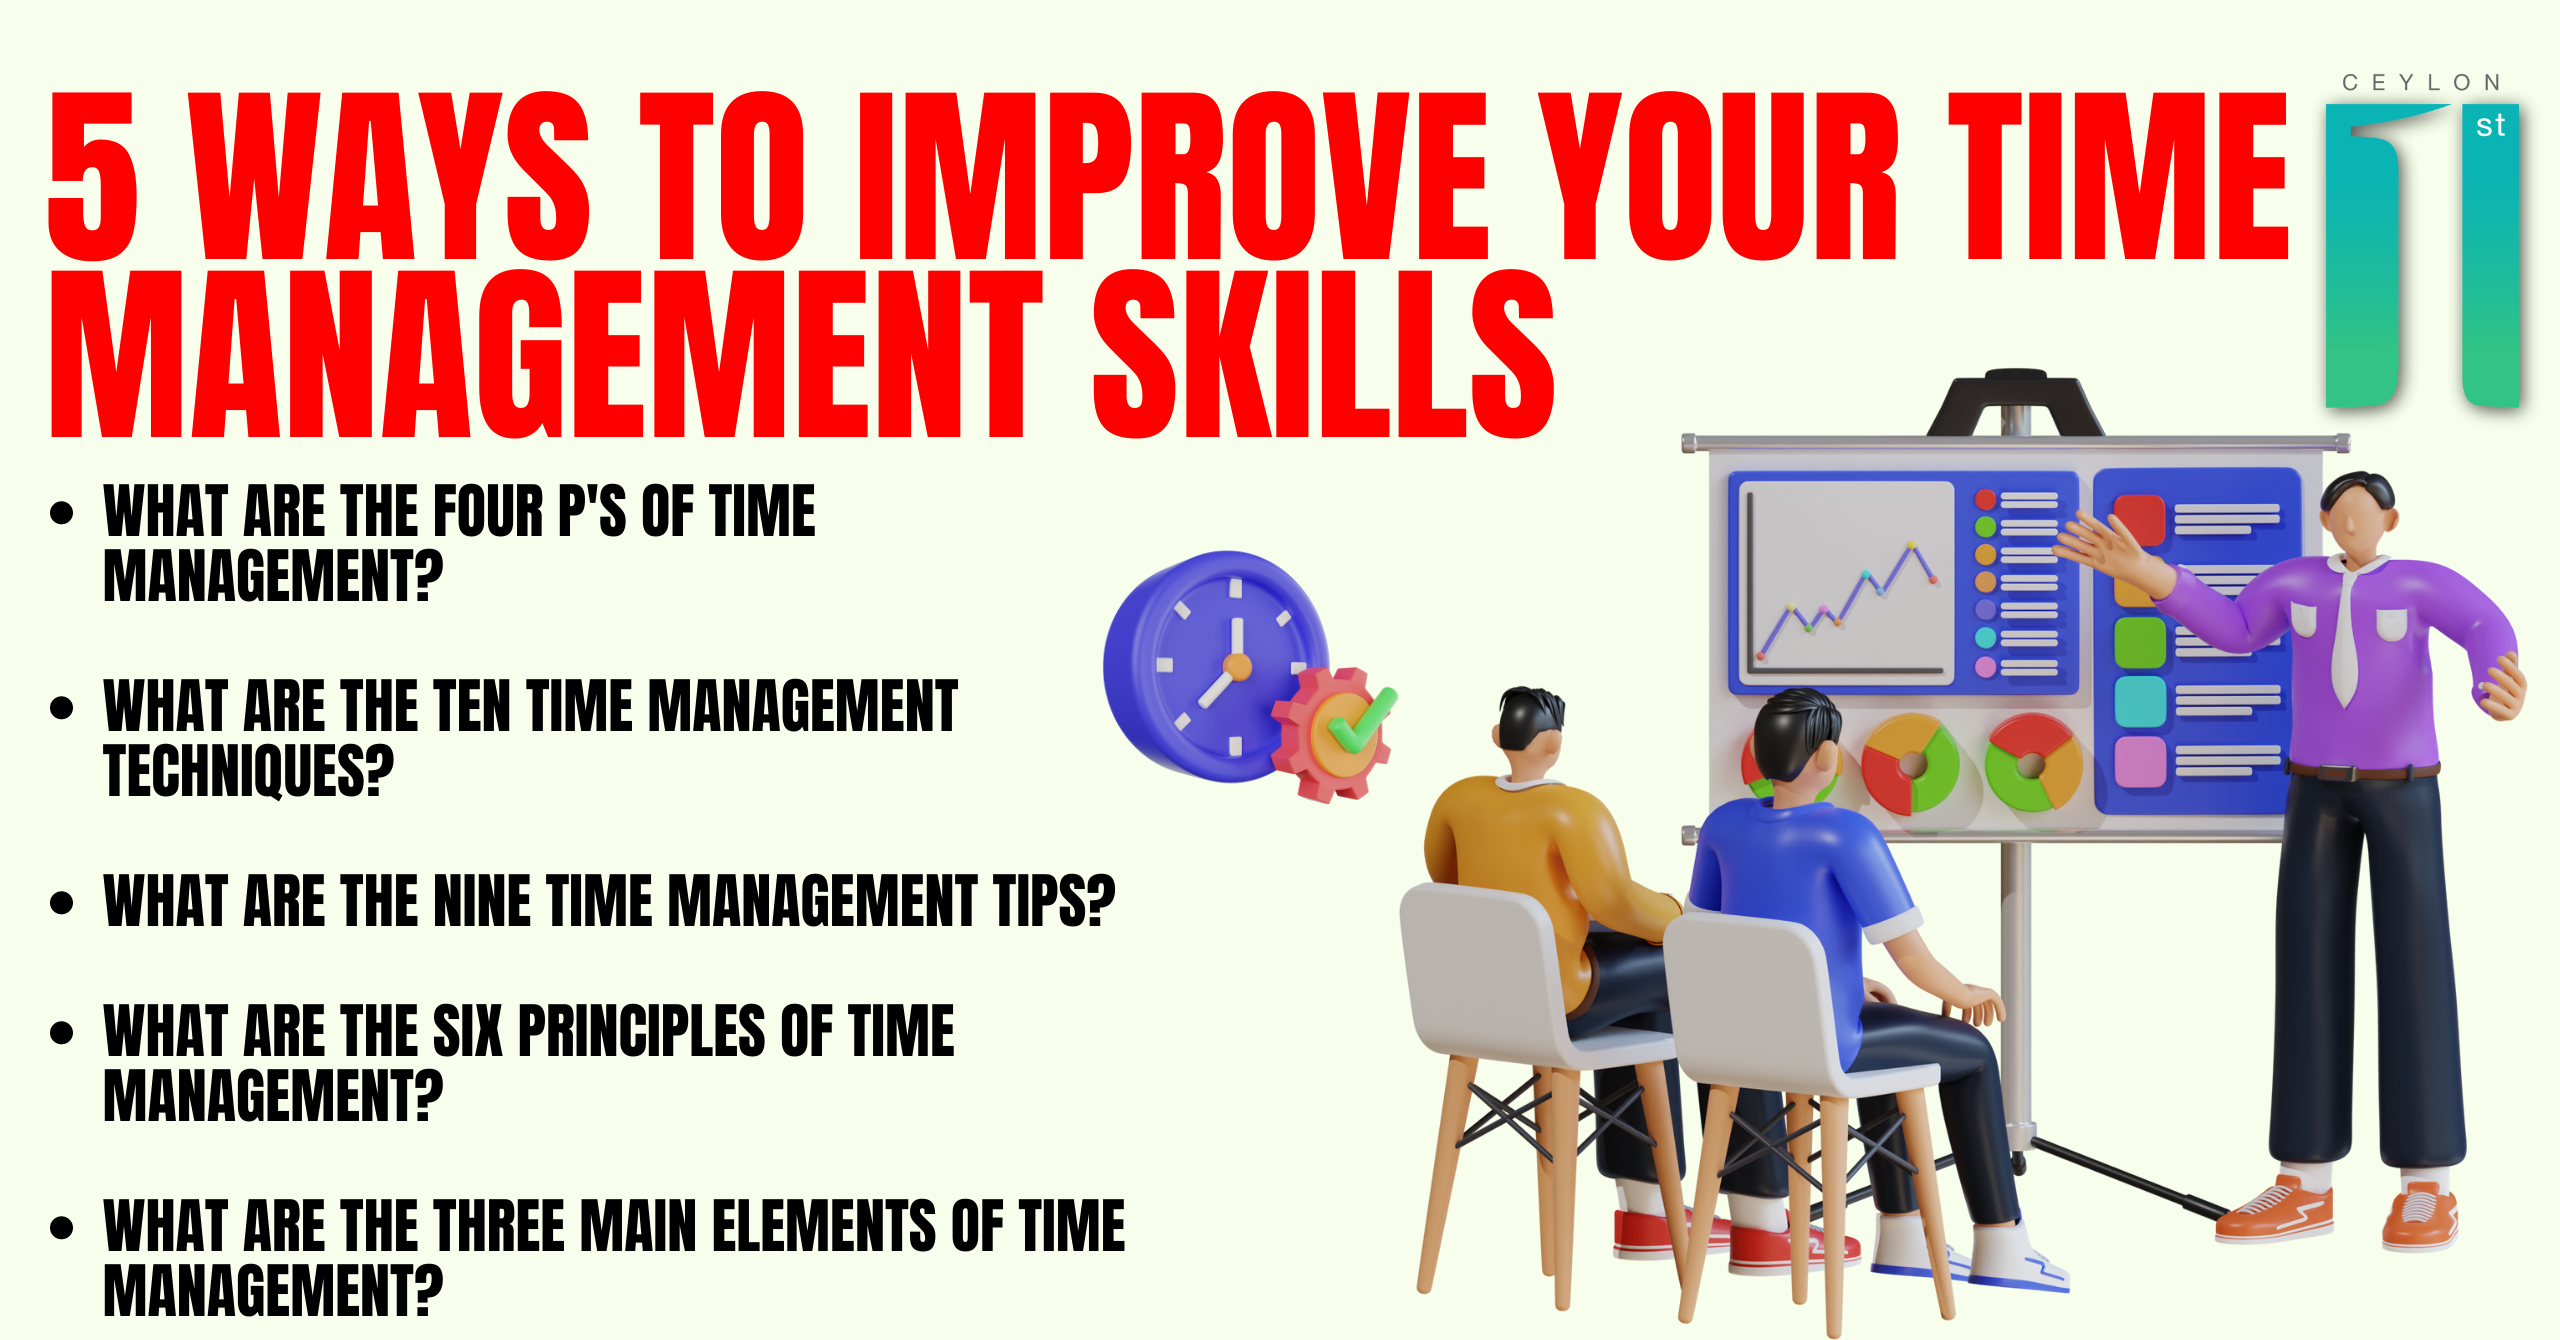 5 Ways to Improve Your Time Management Skills